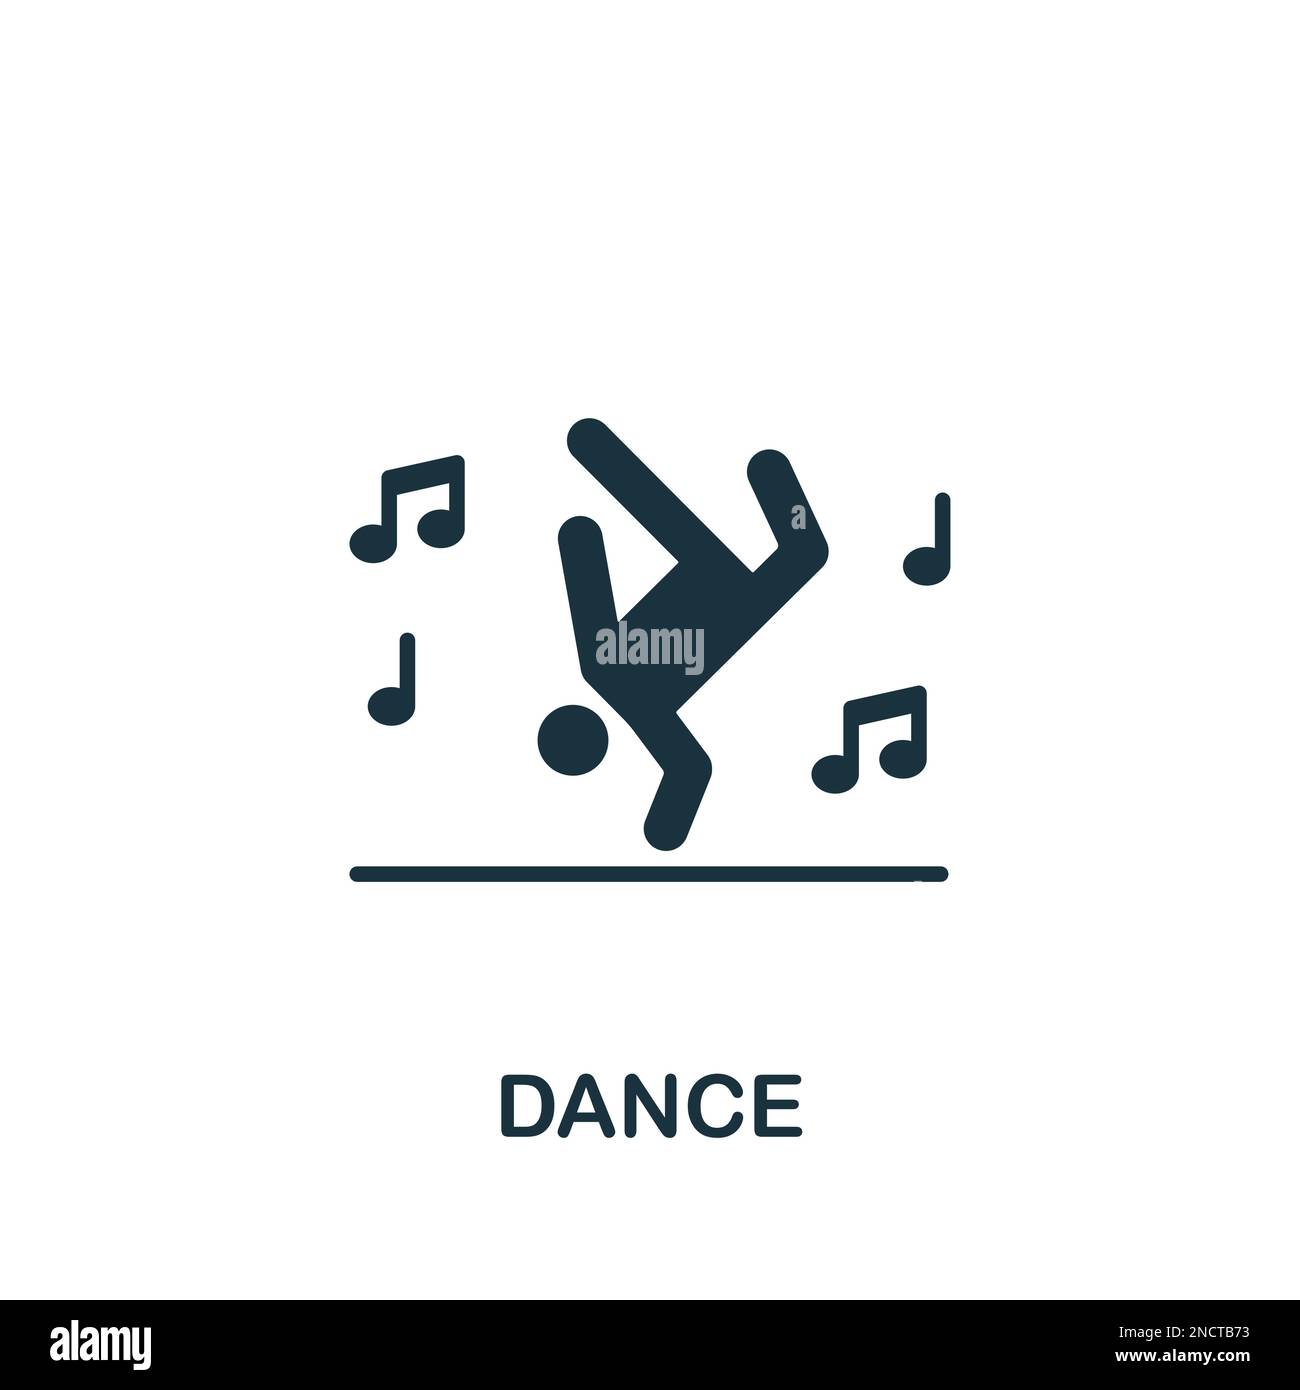 Dance icon. Monochrome simple sign from entertainment collection. Dance icon for logo, templates, web design and infographics. Stock Vector